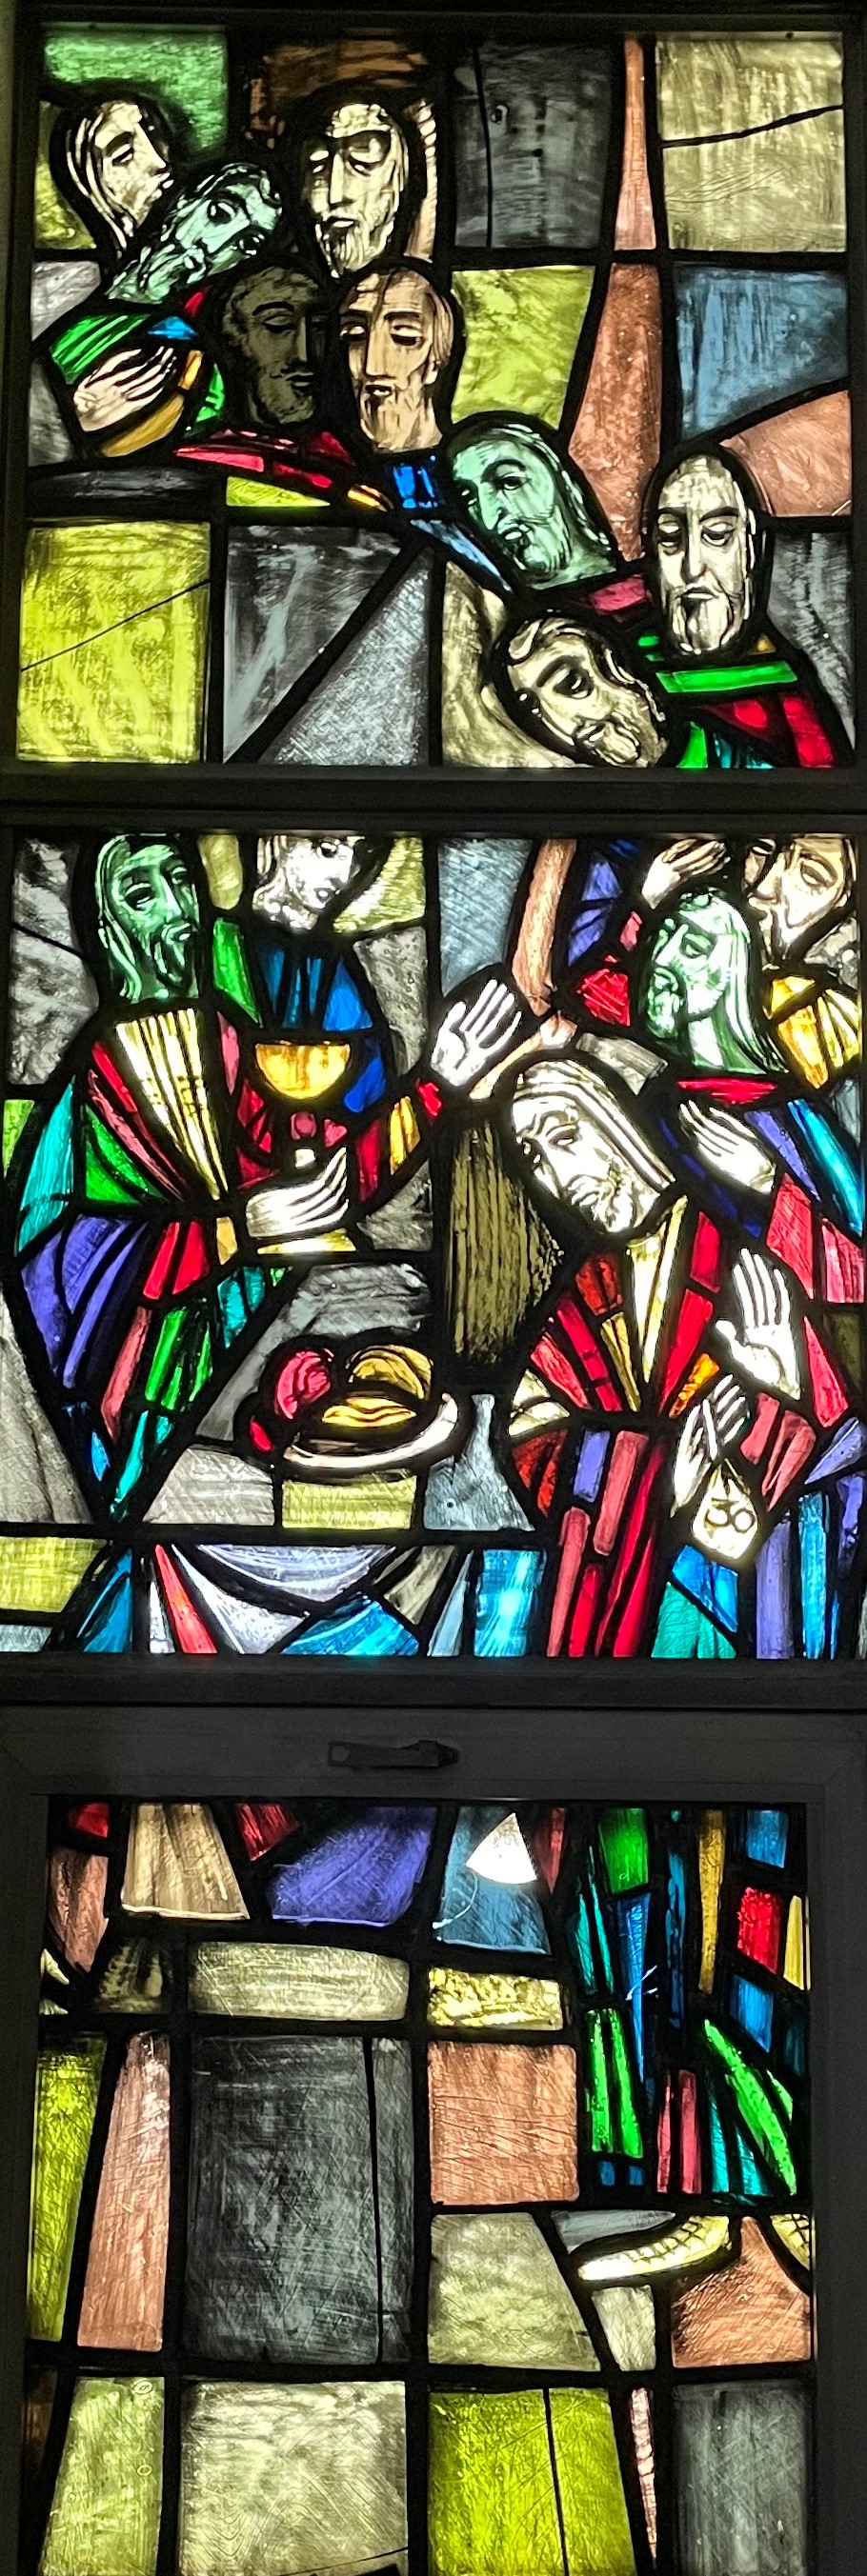 Picture of stained glass window showing The Last Supper